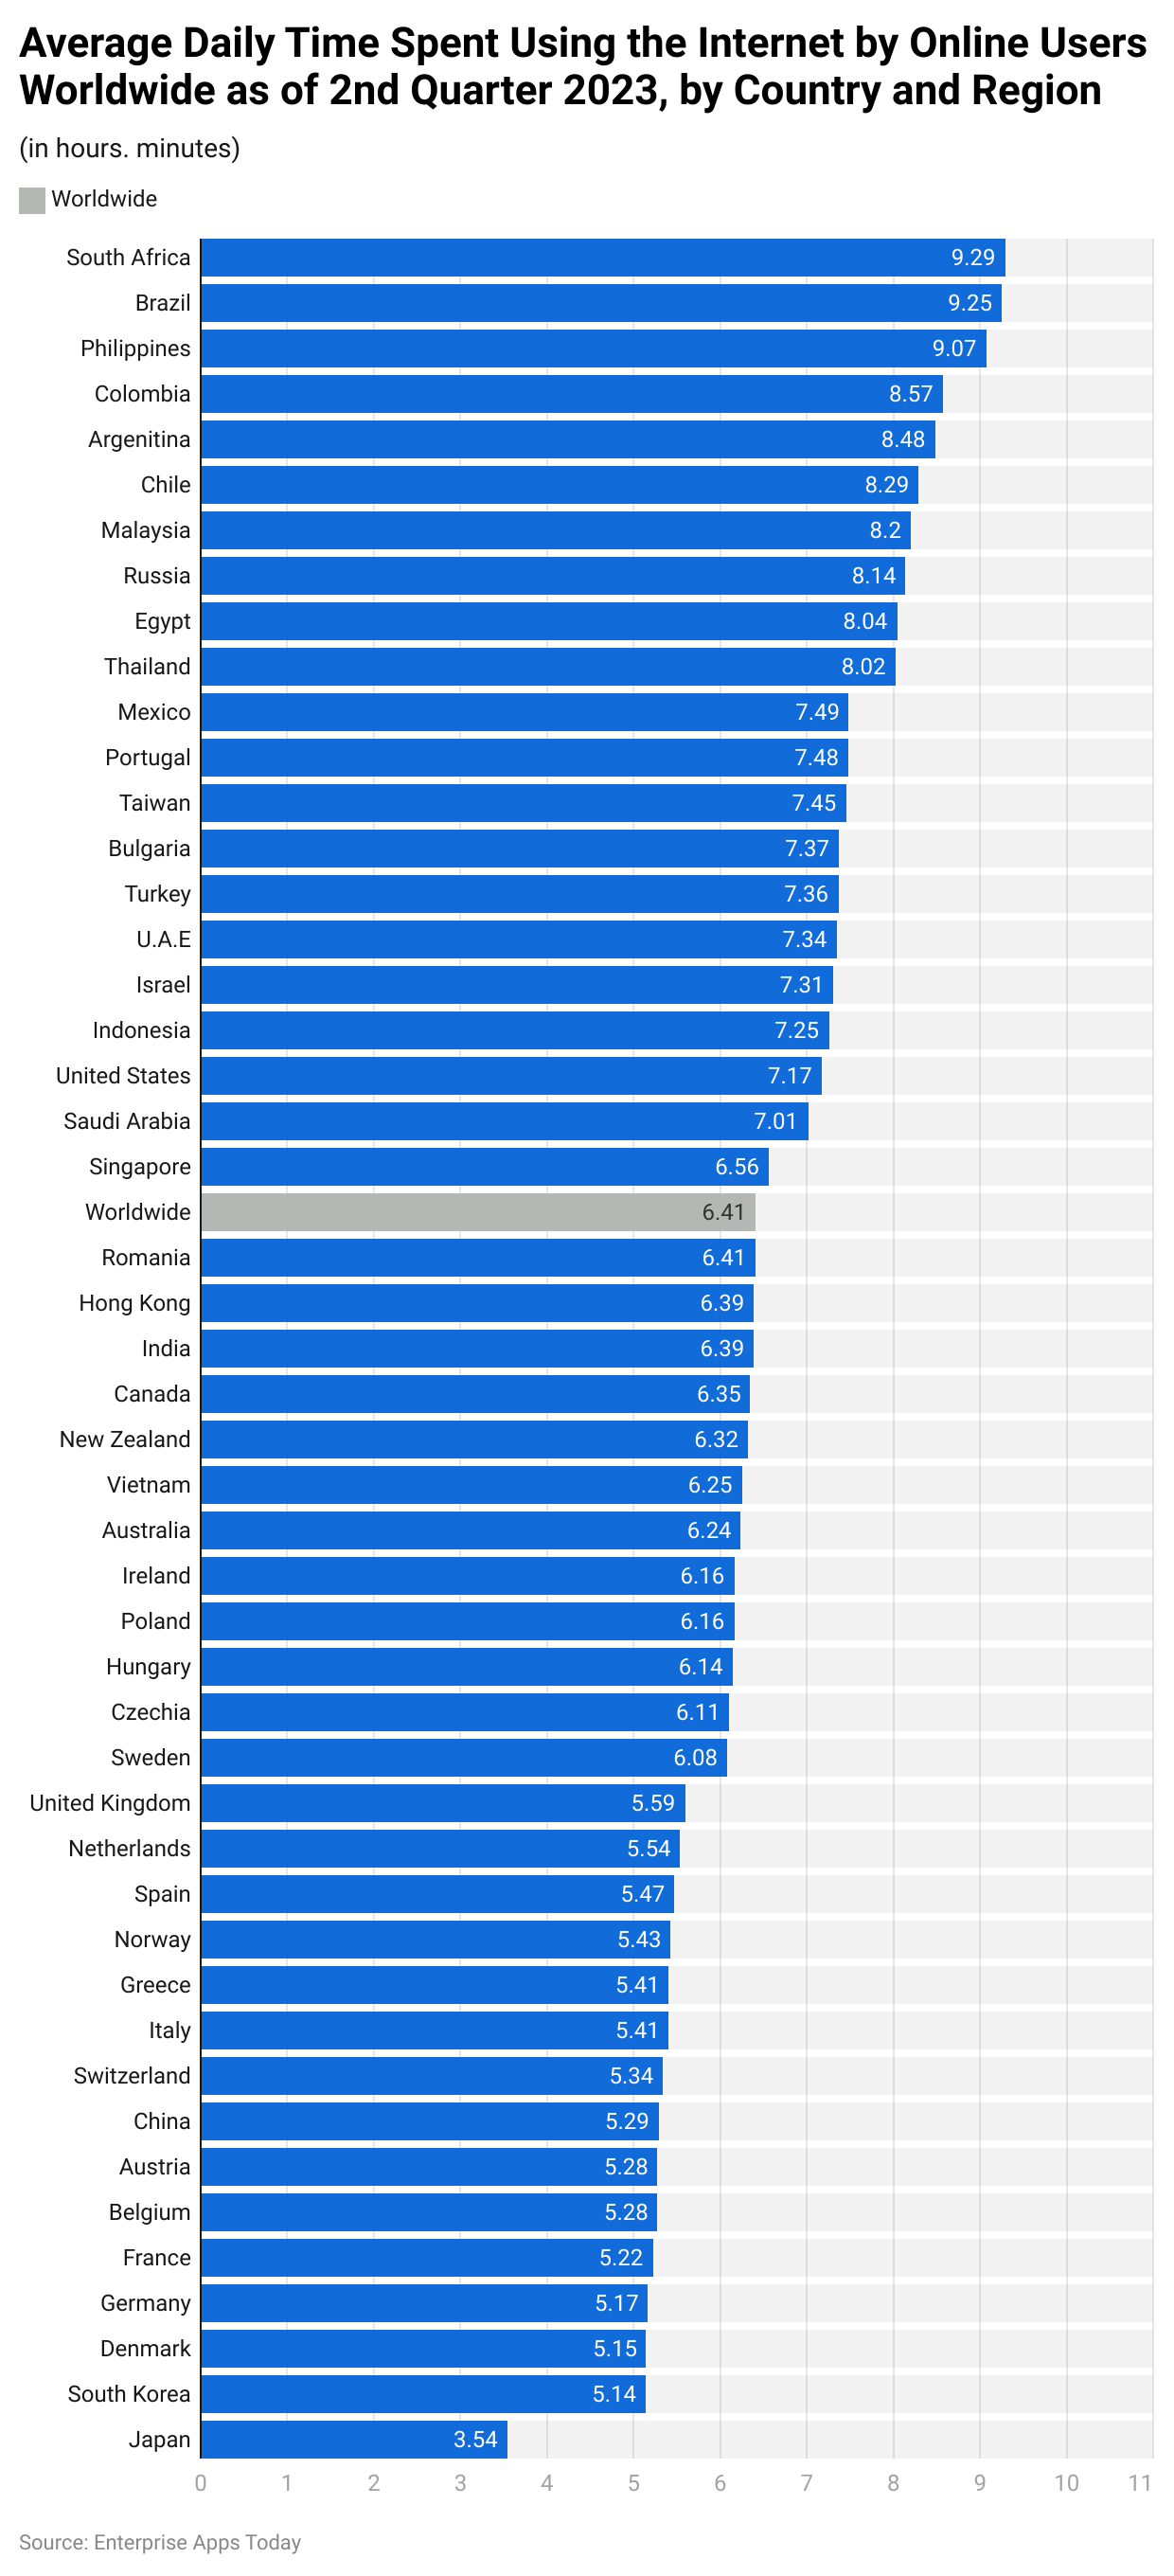 Average daily time spent using the internet by online users worldwide as of 2nd quarter 2023, by country and region